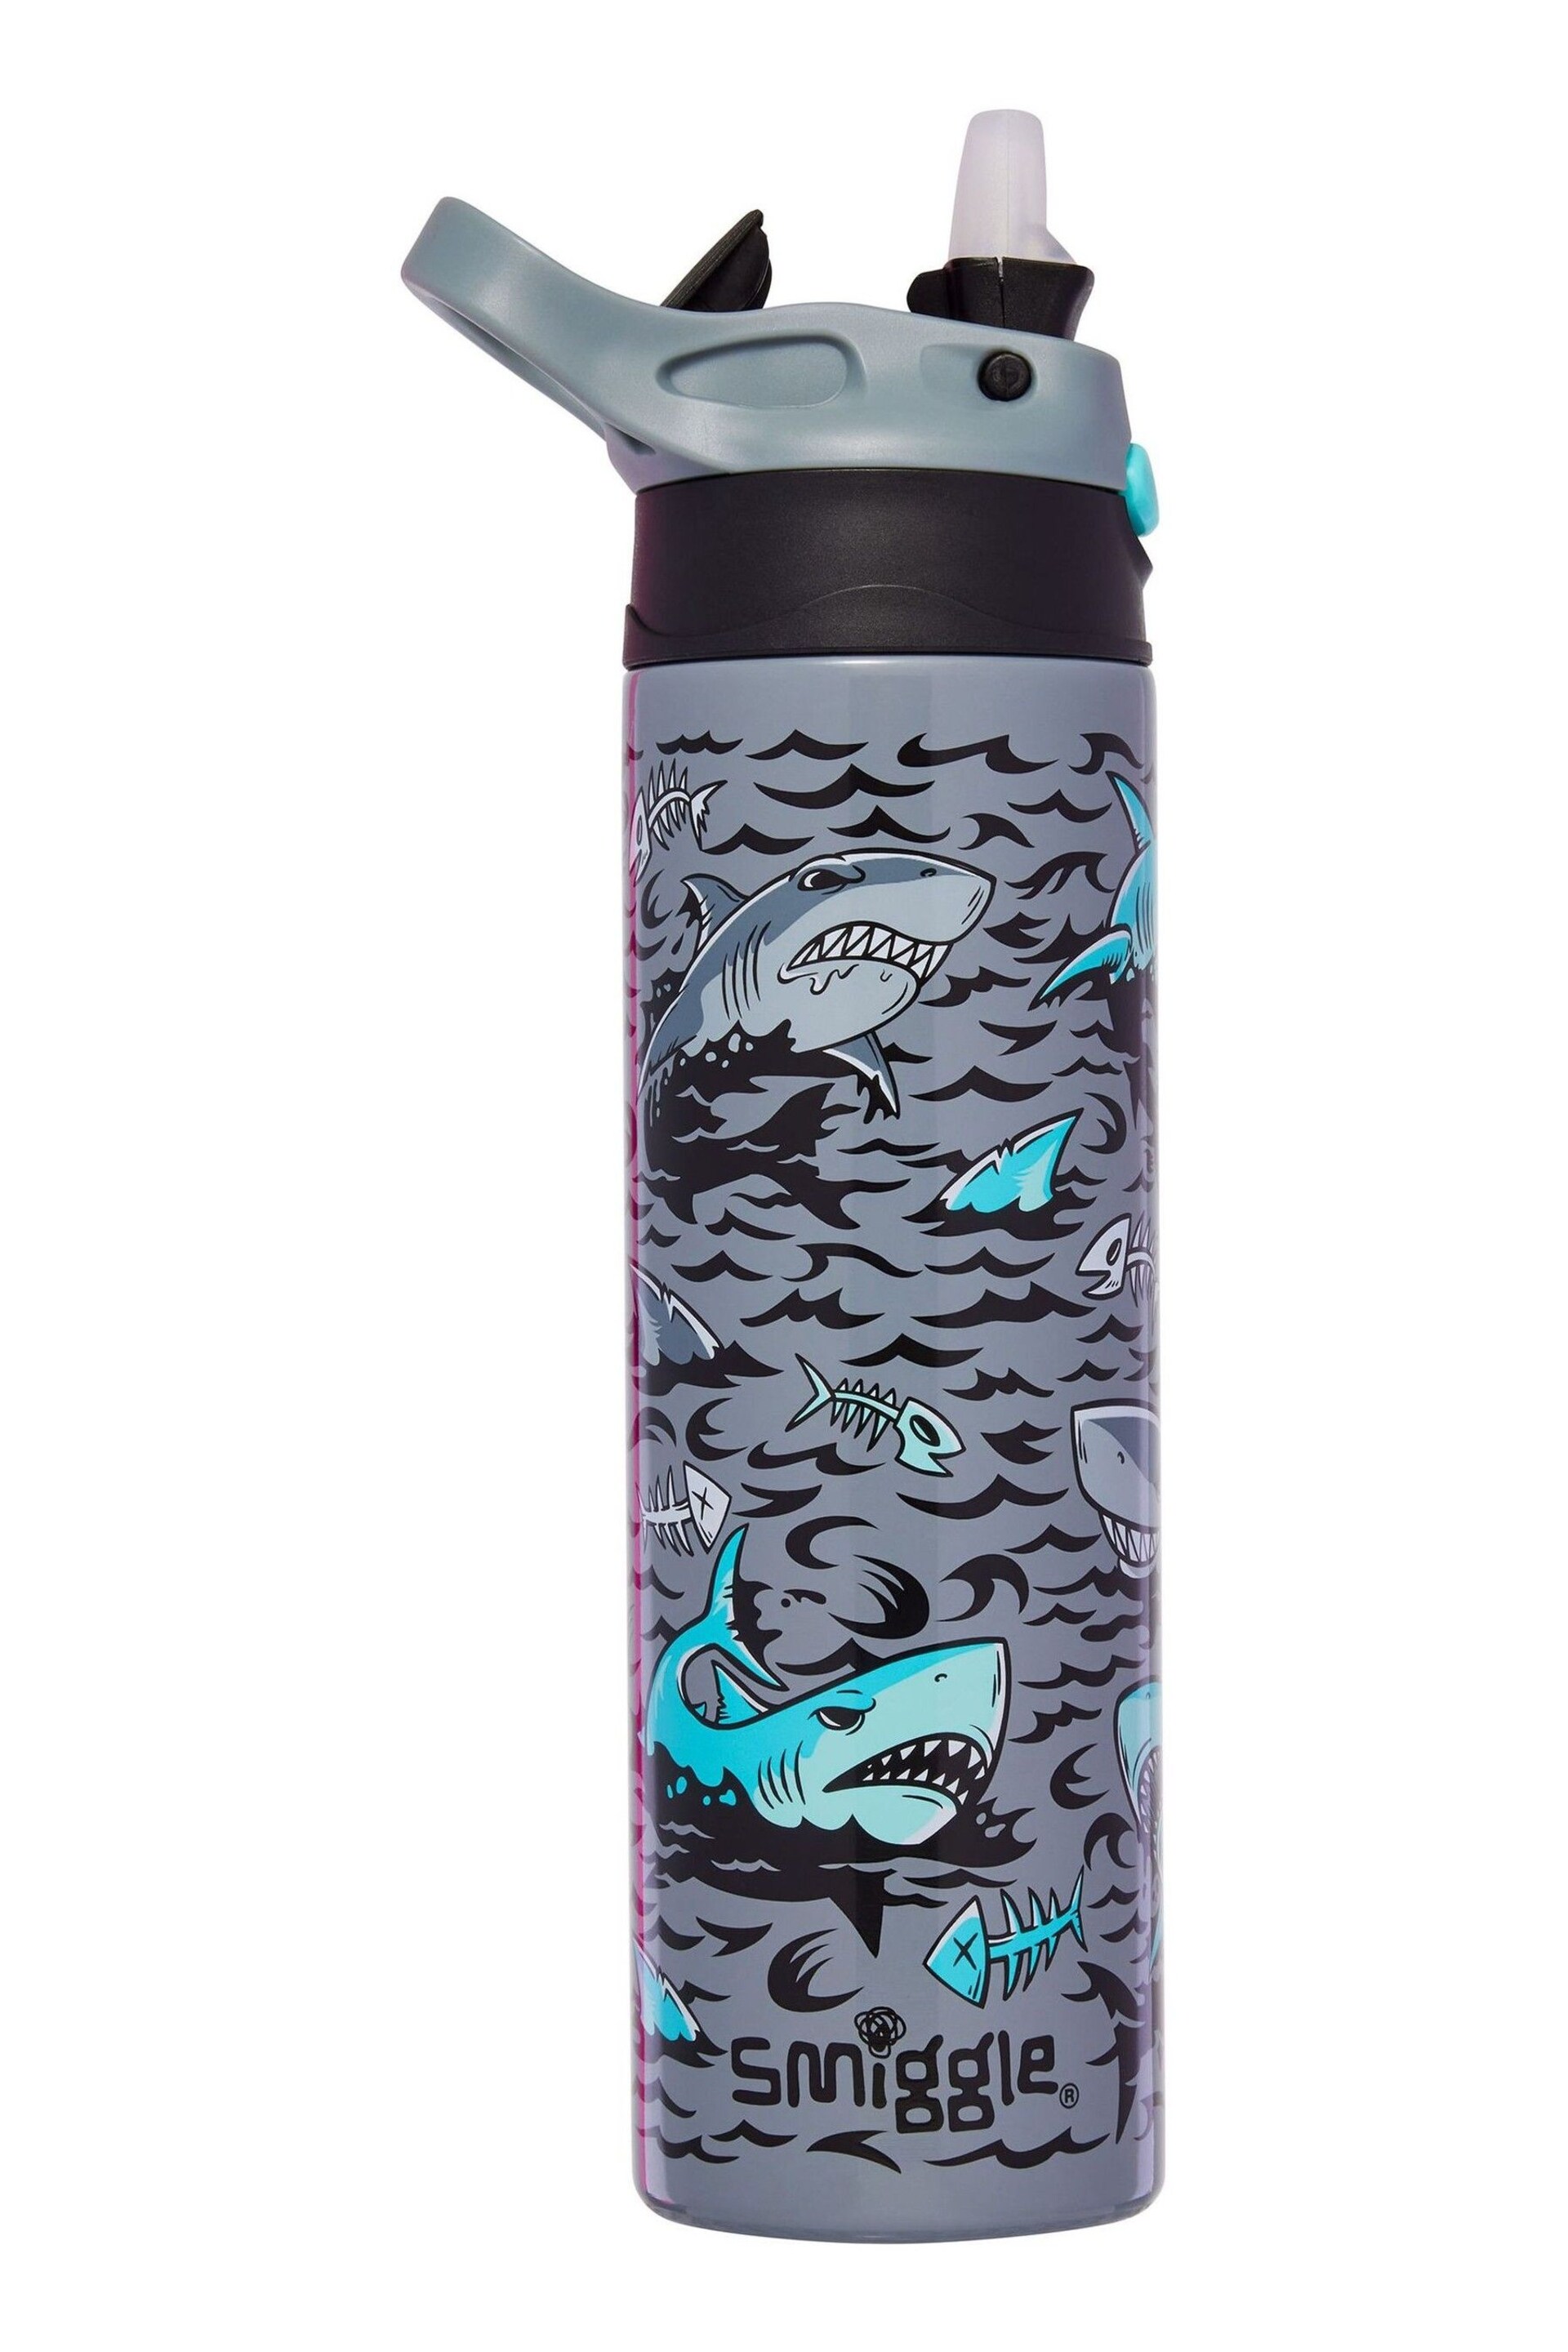 Smiggle Grey Wild Side Insulated Stainless Steel Flip Drink Bottle 520Ml - Image 2 of 2